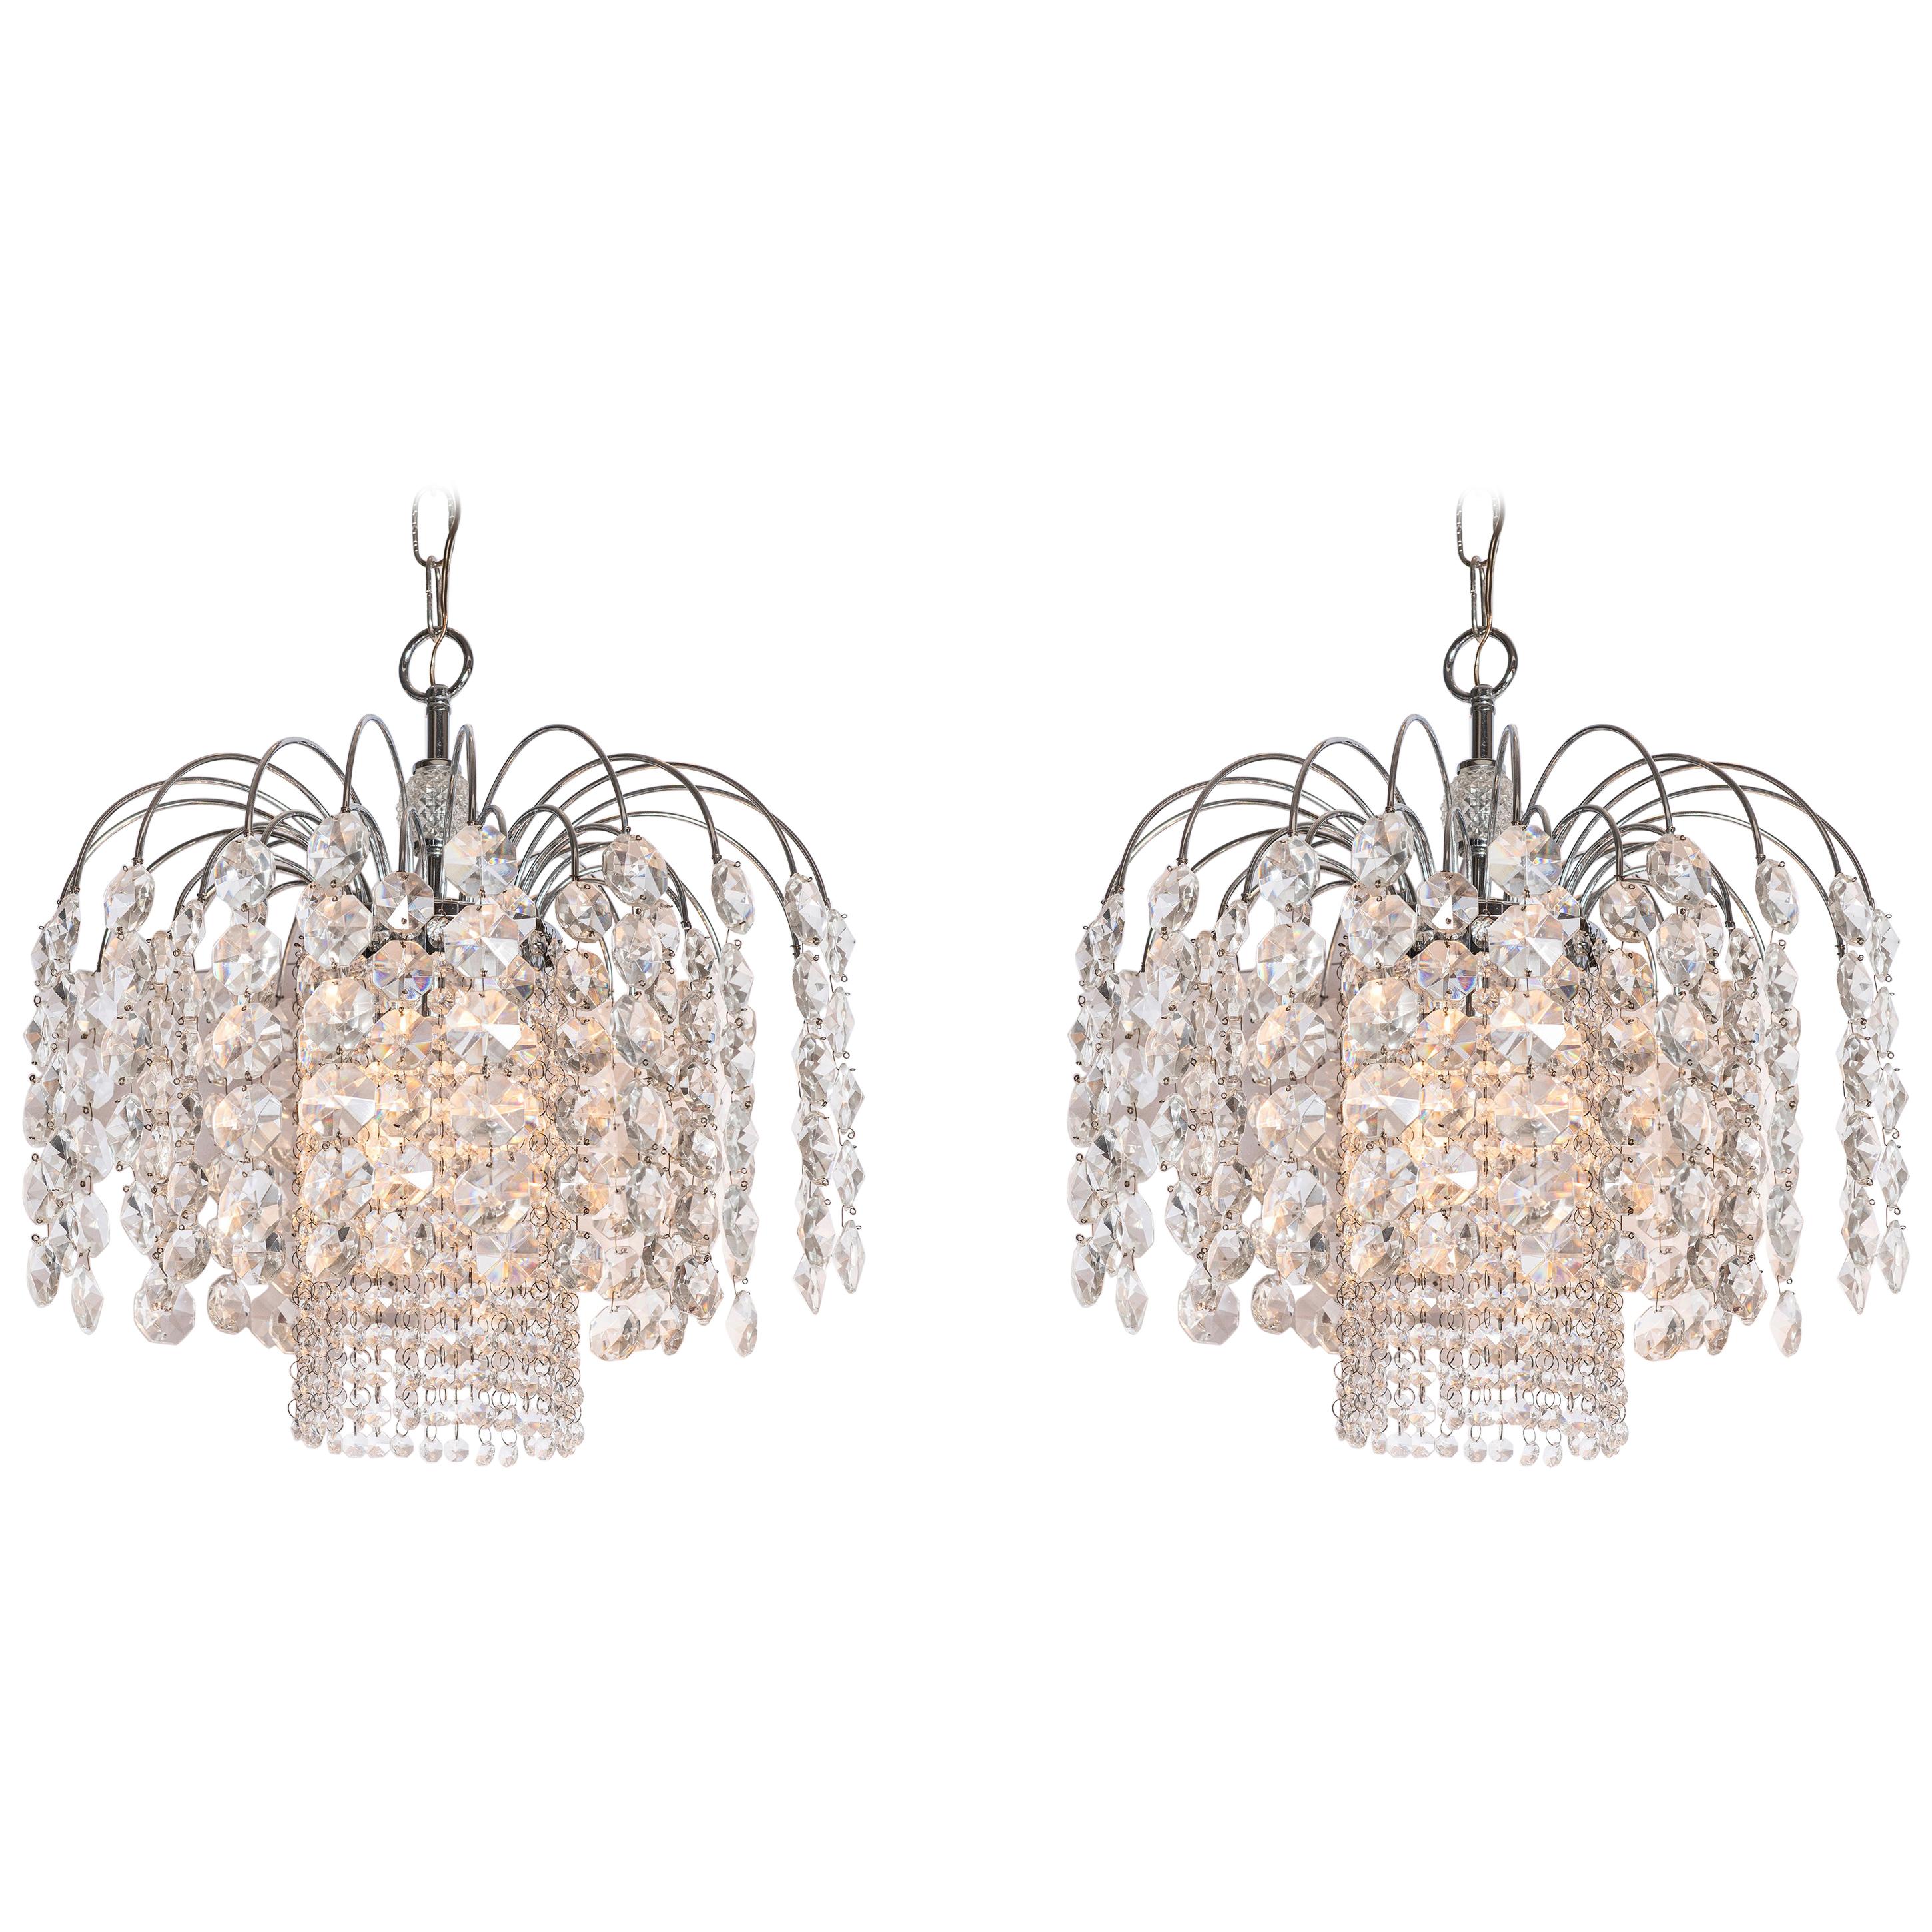 Pair of Crystal and Chrome Chandelier, Attributed to Swarovski, Austria For Sale